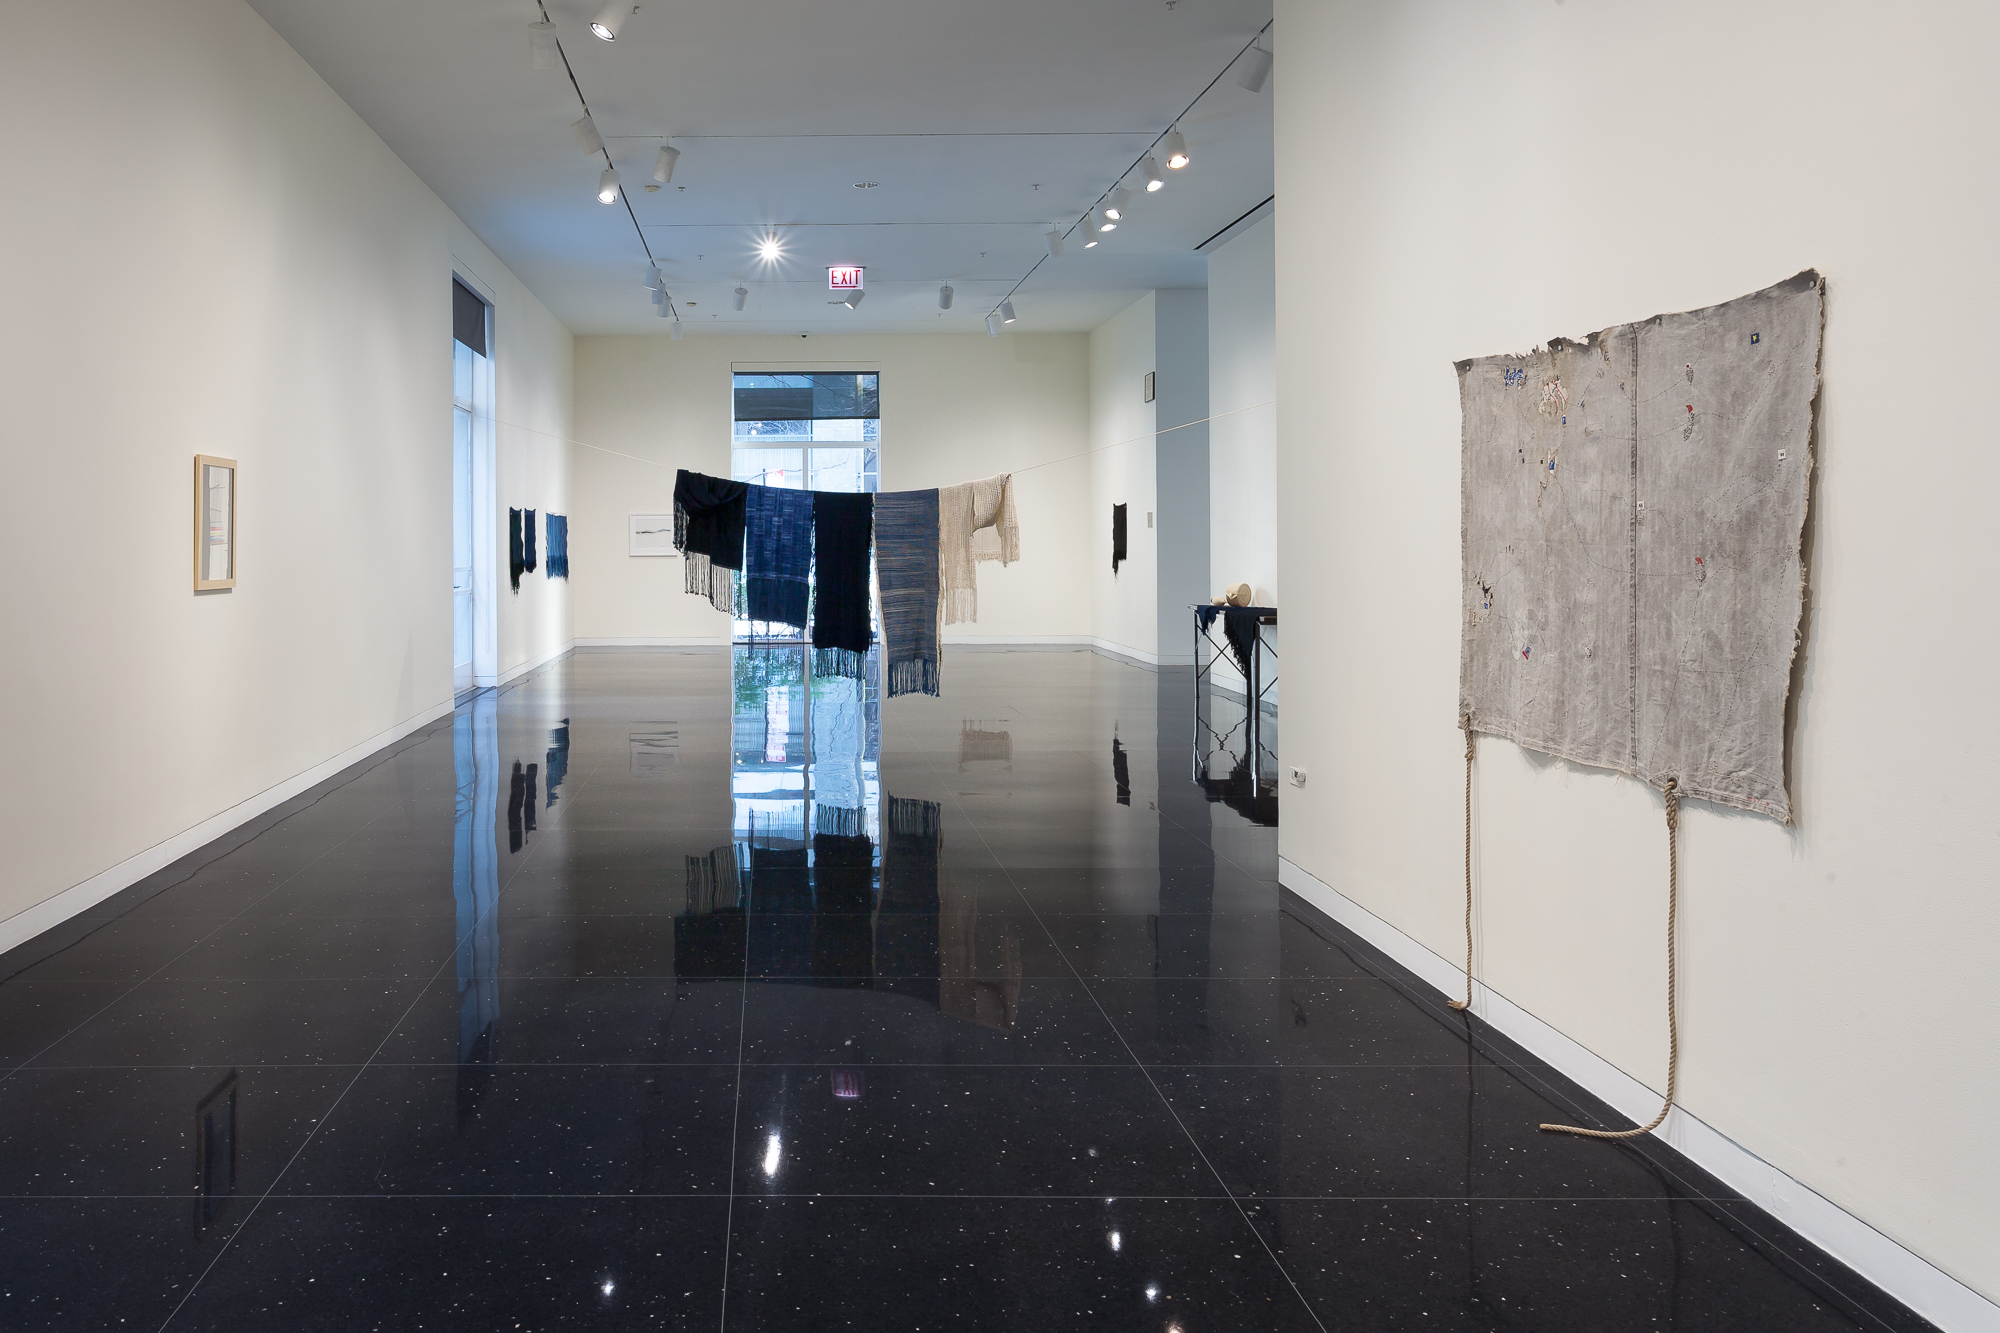 Installation view of a white walled gallery with several installation of textiles. A pale gray, slightly fringed textile hangs on the right wall. In the middle of the gallery hang several indigo dyed cloths suspended on a clothesline.